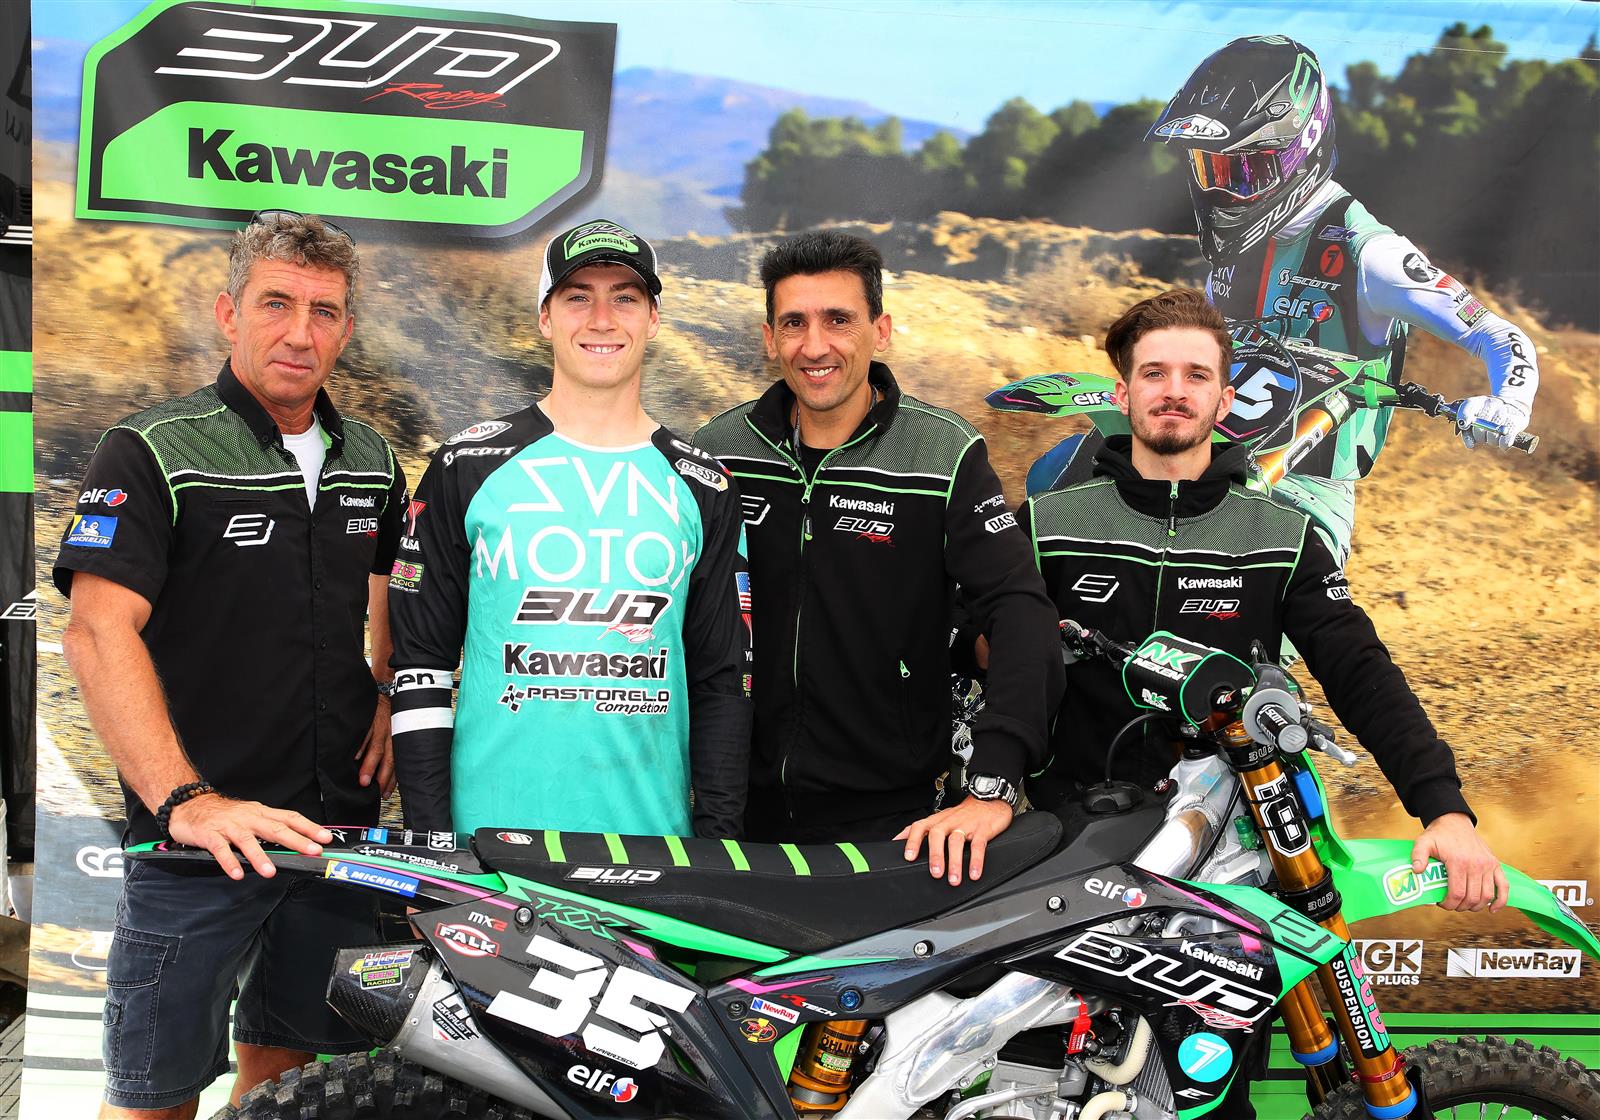 Bud Racing confirms Mitchell Harrison for 2020